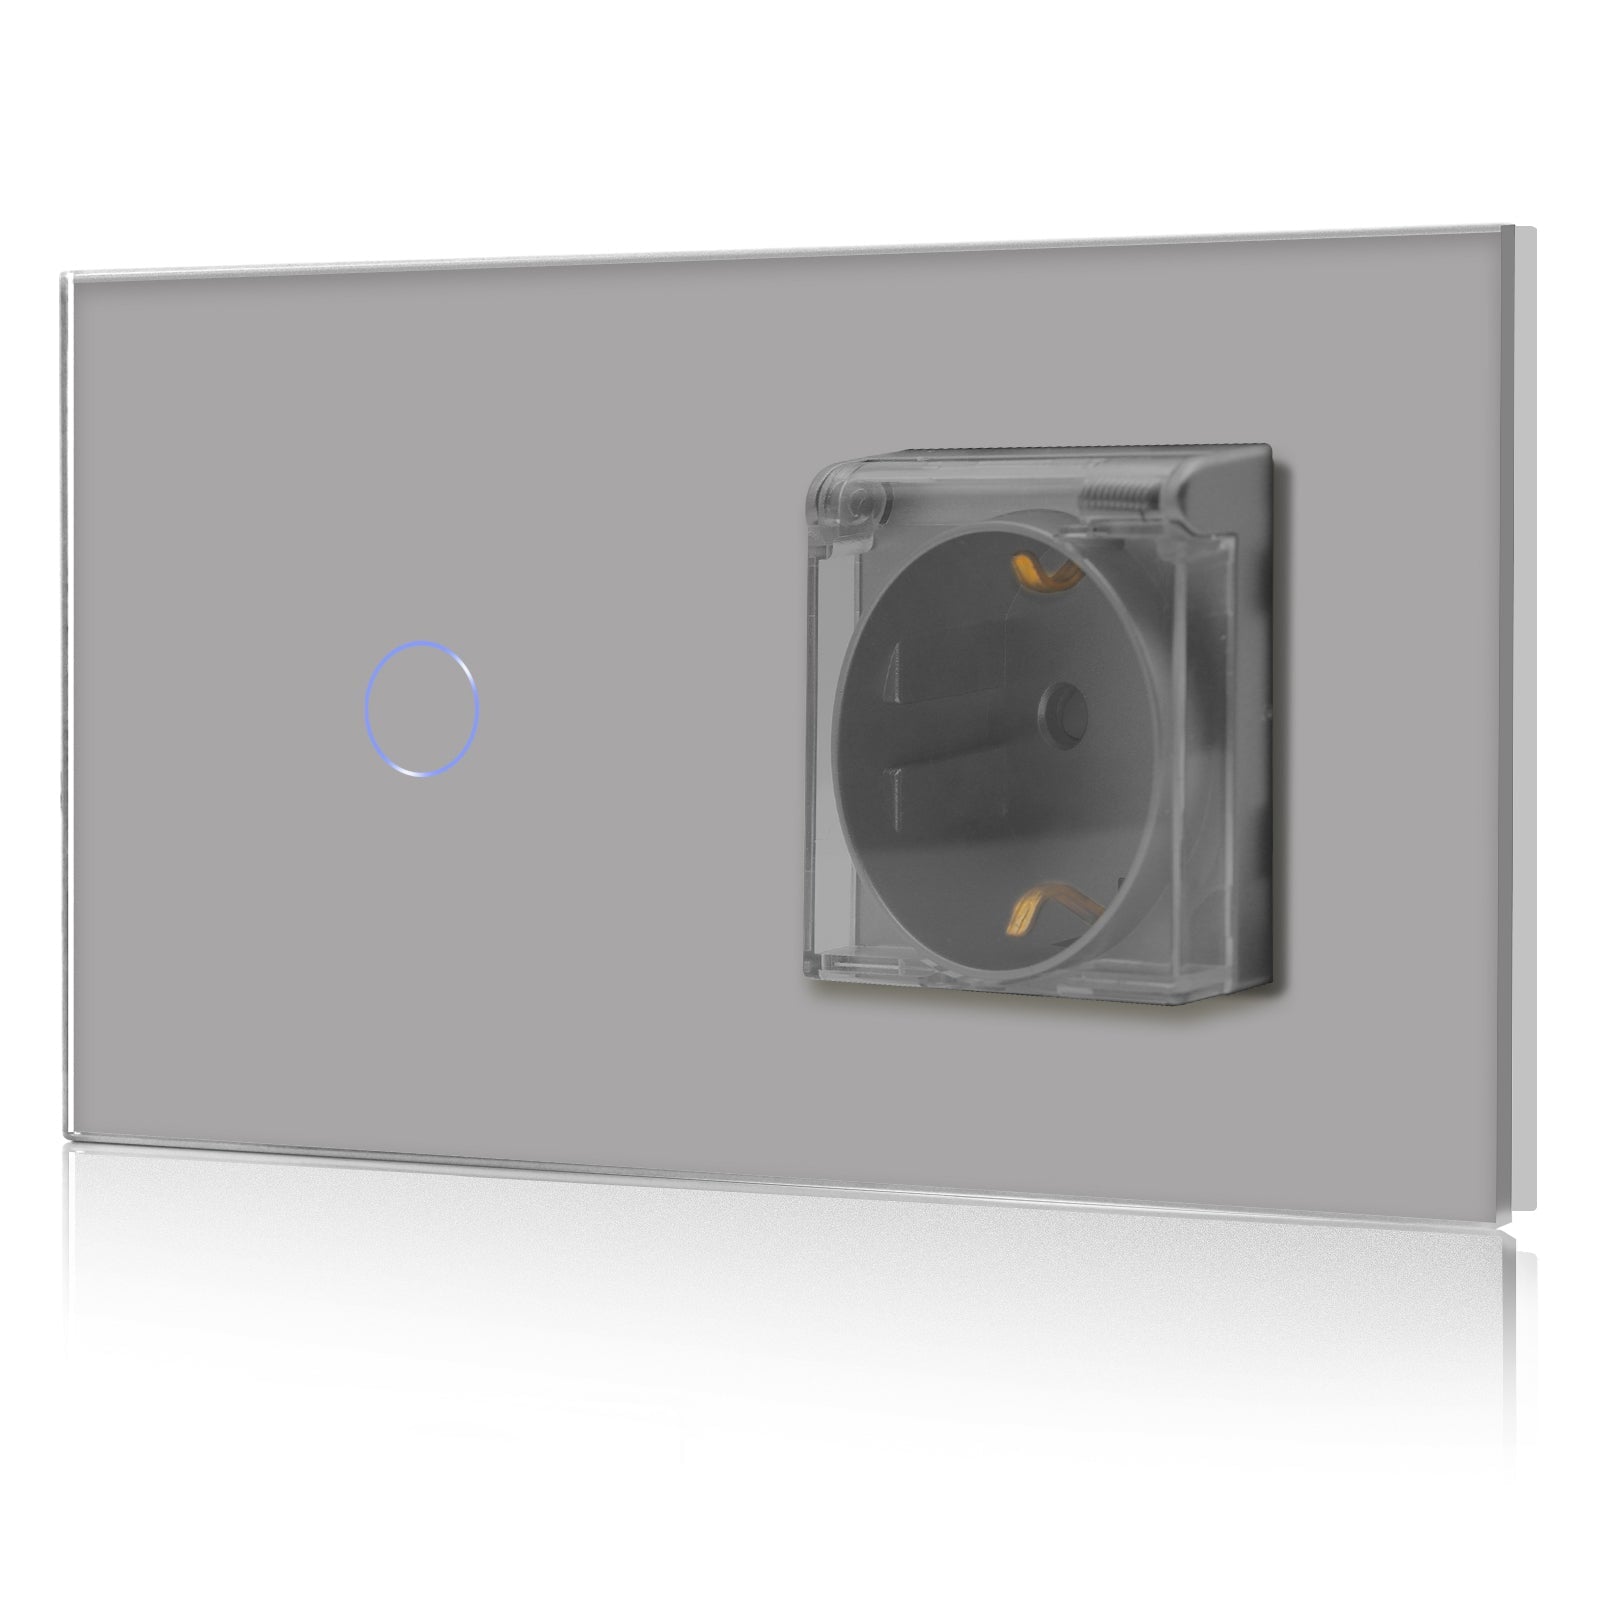 Bseed 1/2/3 Gang 1/2/3 Way Touch Light Switch with Waterproof Eu Socket 300W Wall Plates & Covers Bseedswitch Grey 1 Gang 1 Way